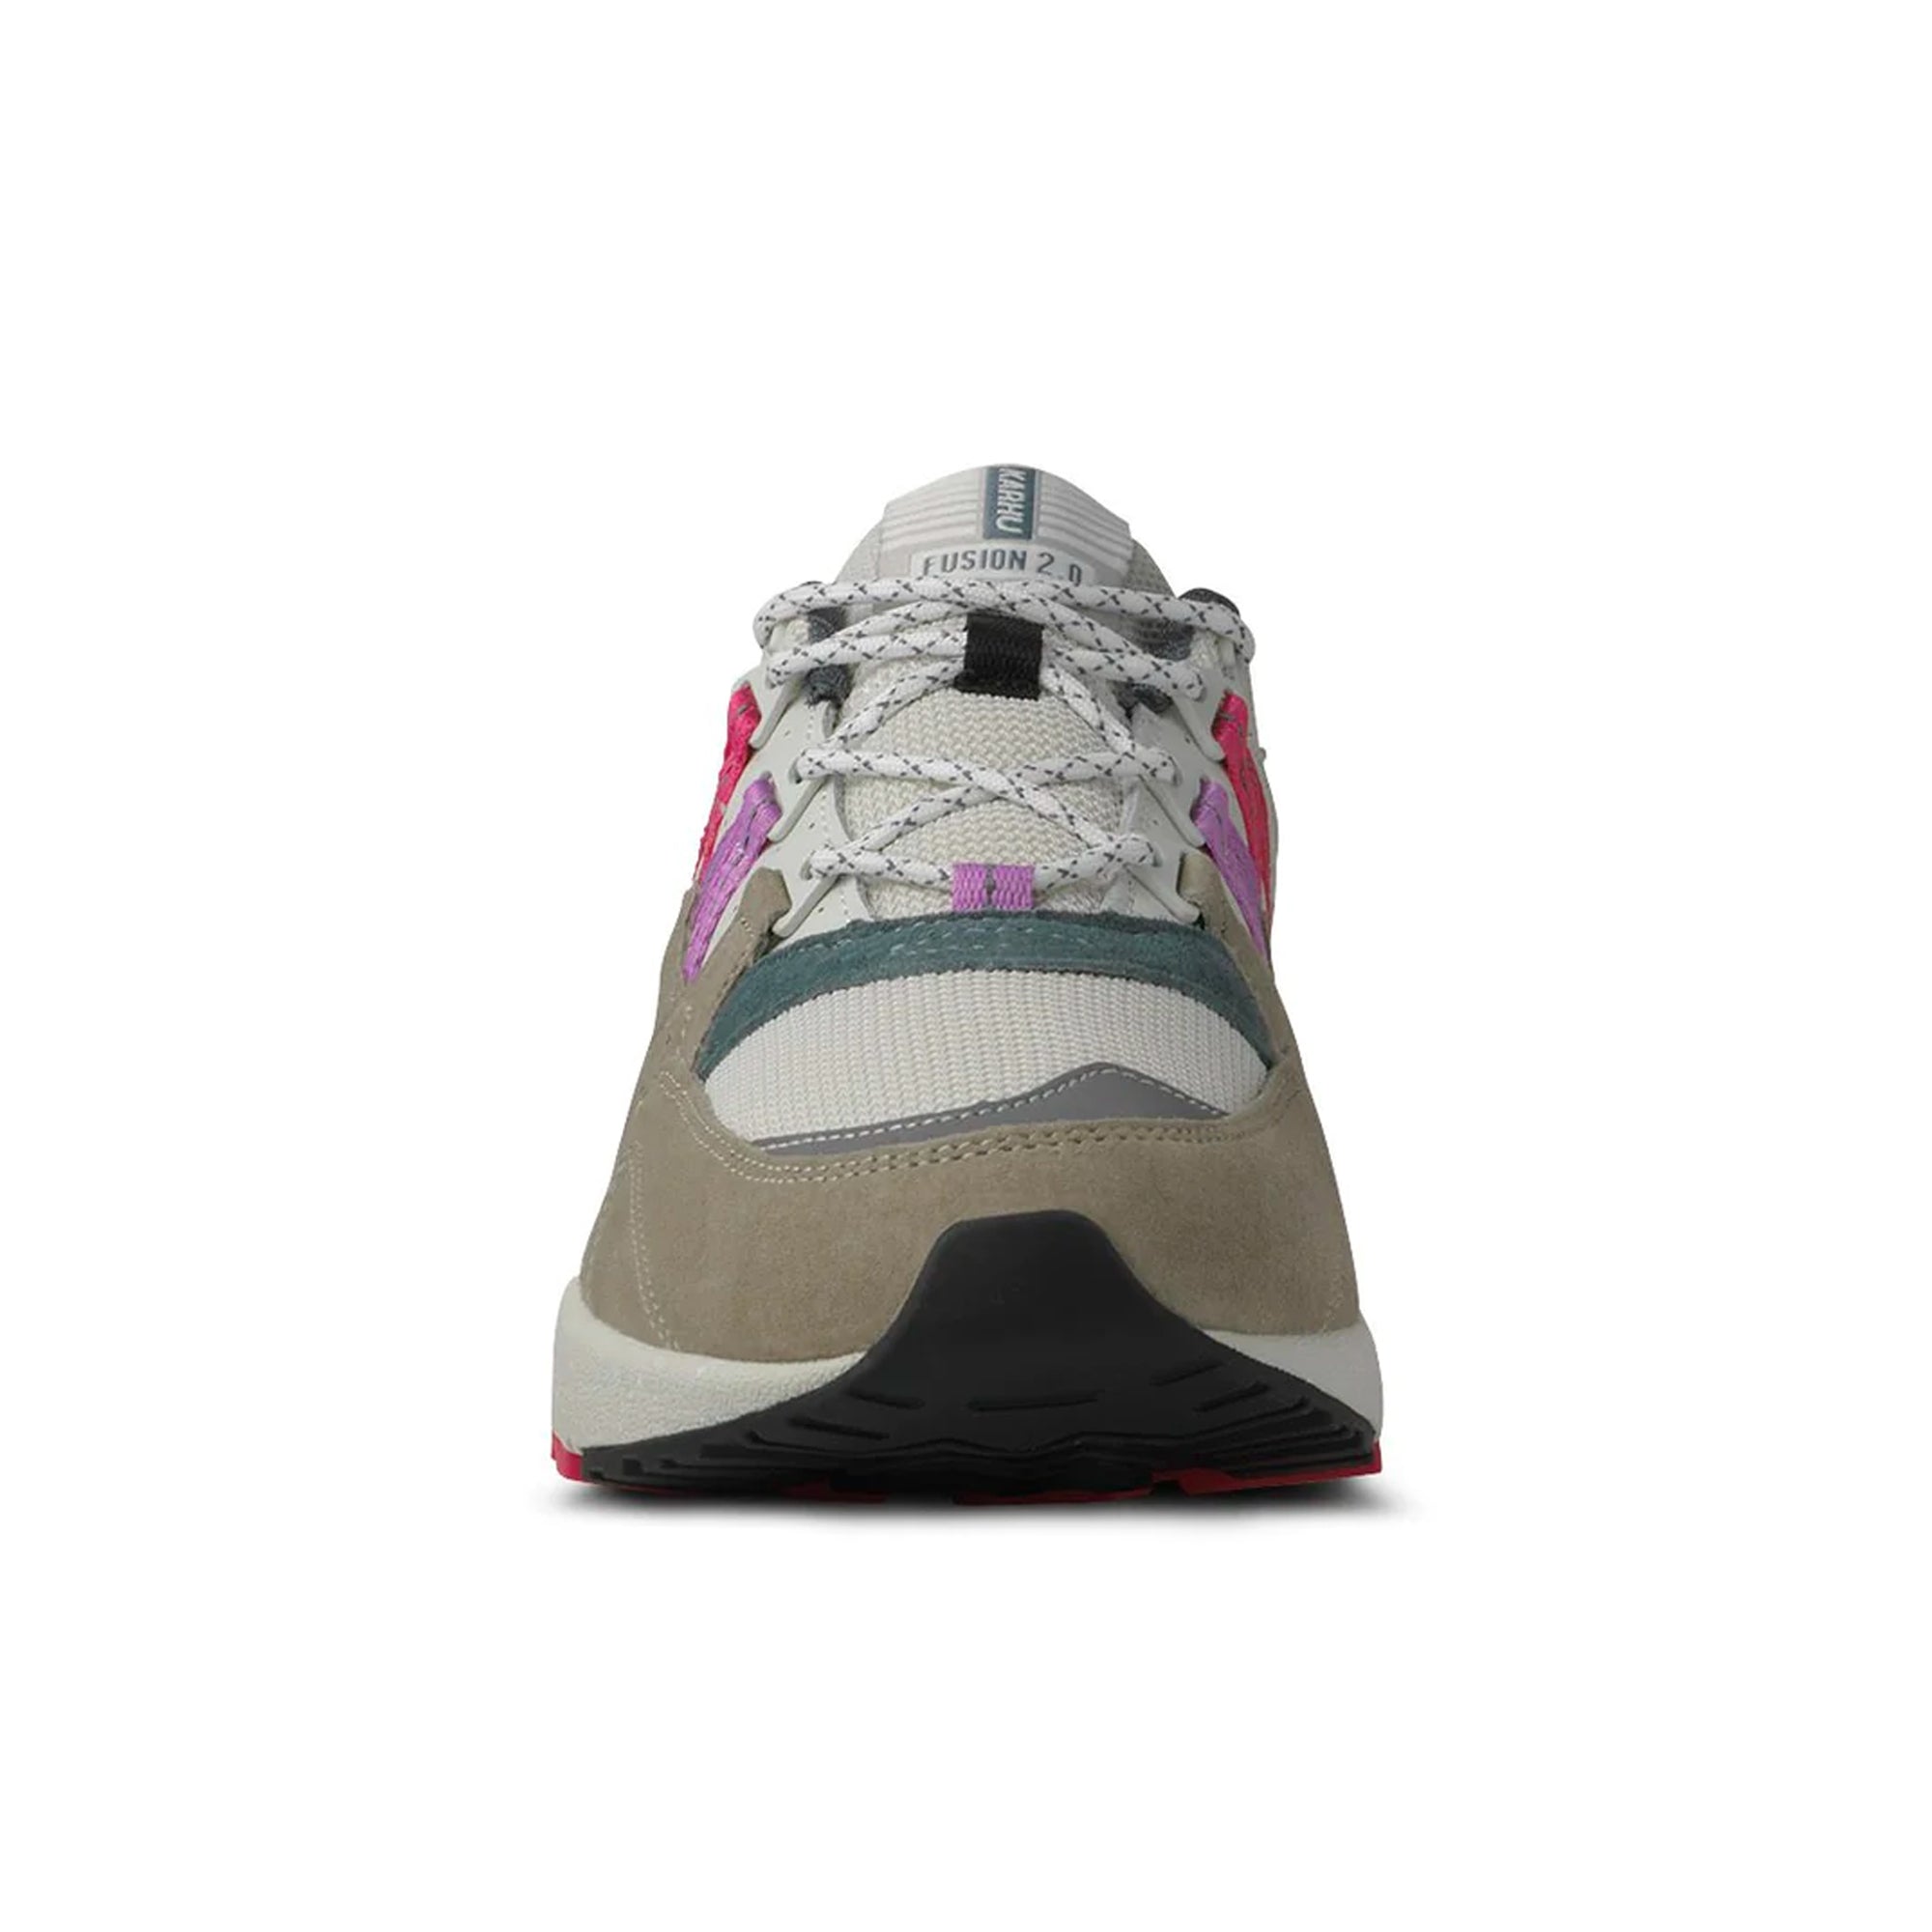 Karhu Fusion 2.0 Trainers 'The Forest Rules Pack' - Abbey Stone / Pink Yarrow